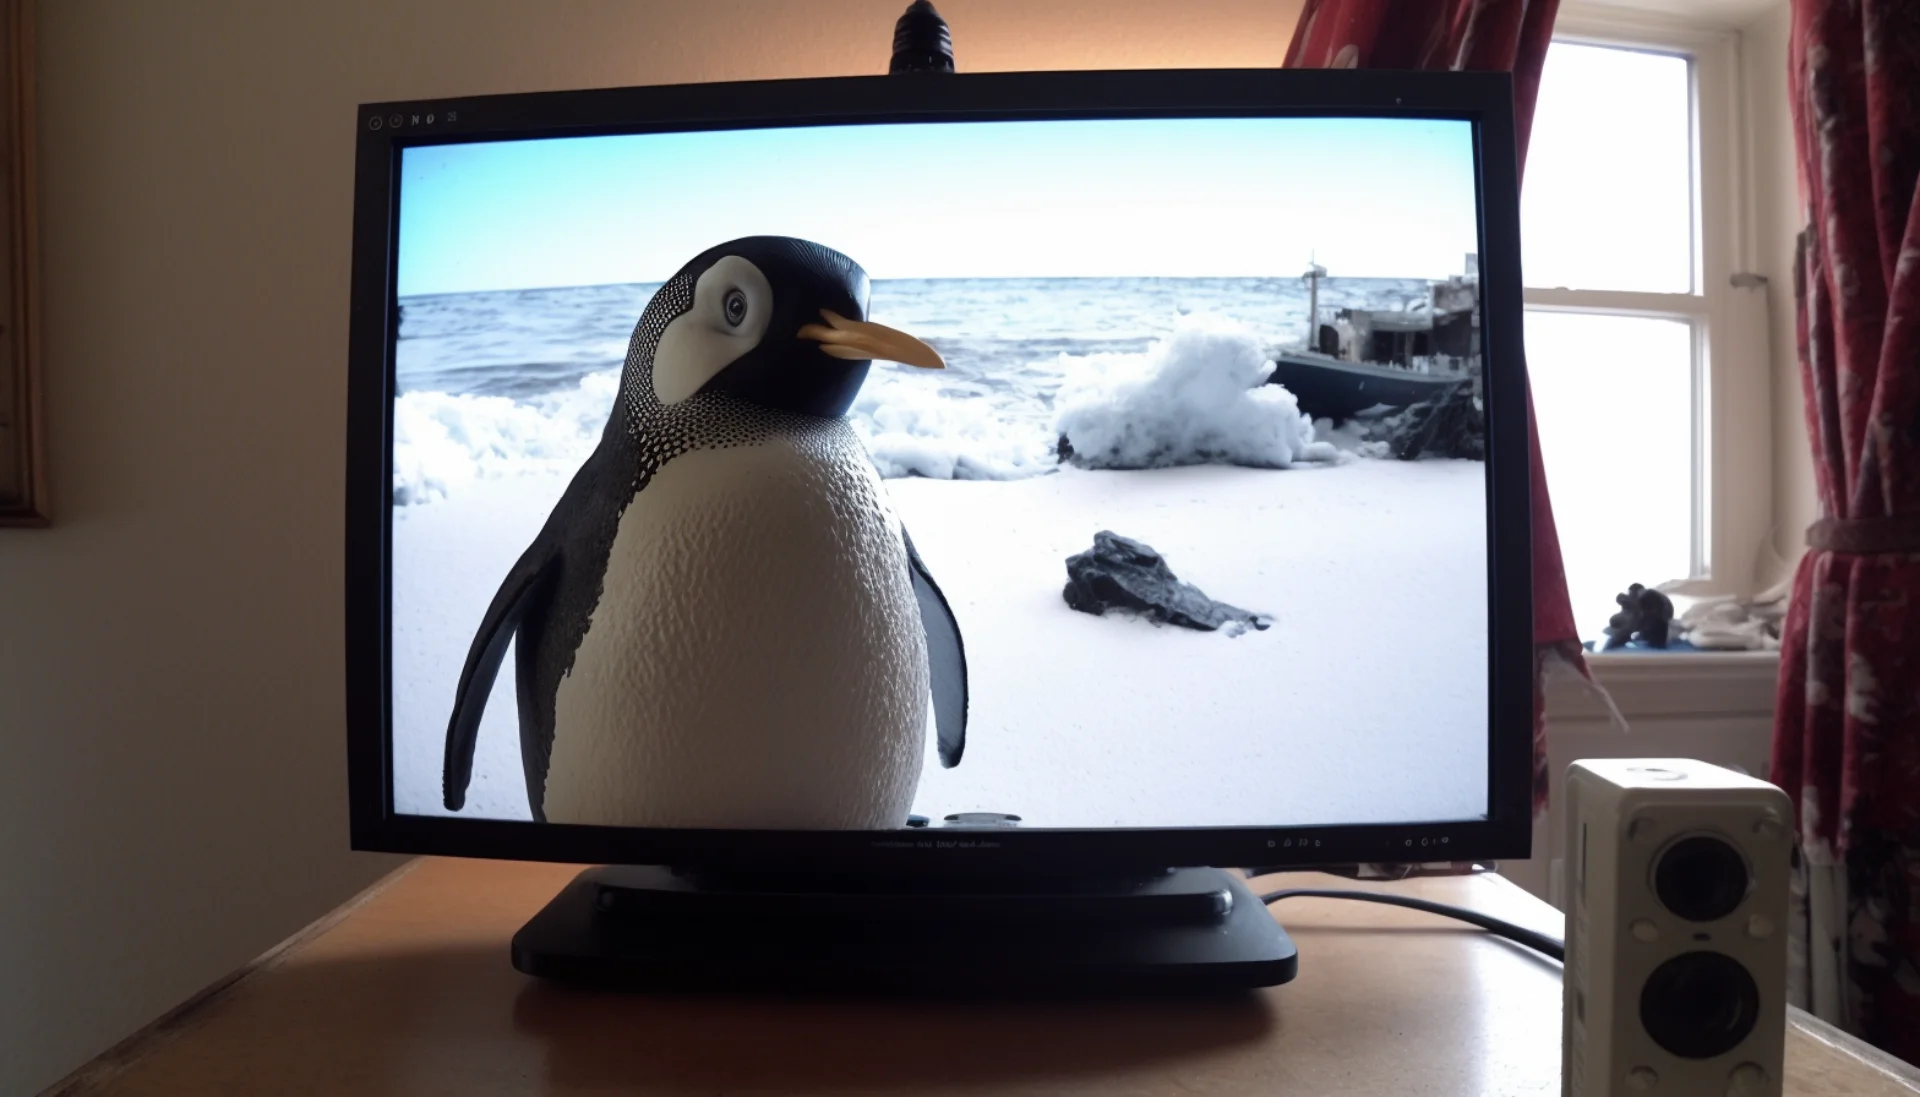 How to configure your webcam on Linux with Cameractrls